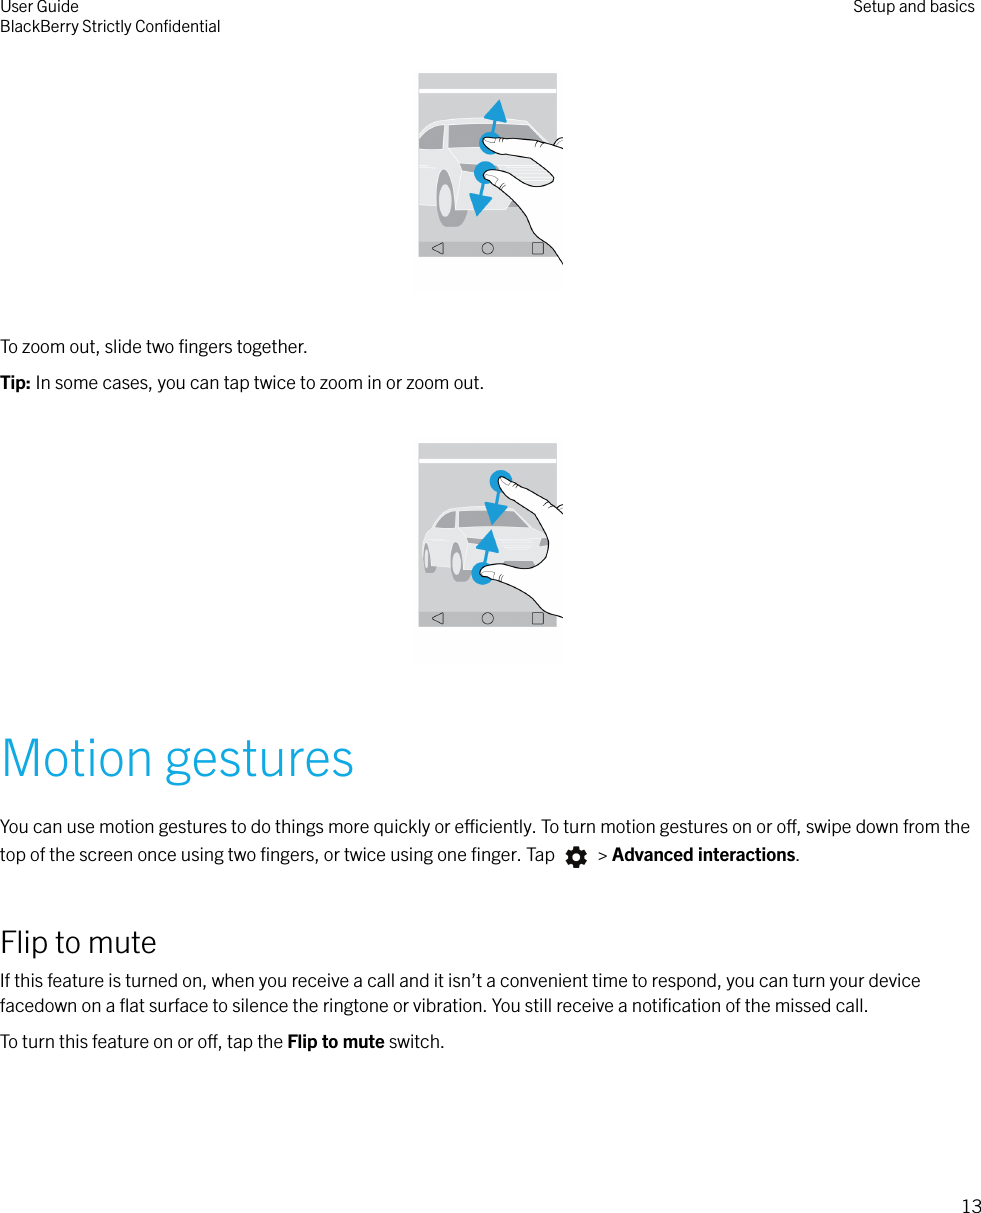  To zoom out, slide two ﬁngers together.Tip: In some cases, you can tap twice to zoom in or zoom out.  Motion gesturesYou can use motion gestures to do things more quickly or eciently. To turn motion gestures on or o, swipe down from thetop of the screen once using two ﬁngers, or twice using one ﬁnger. Tap   &gt; Advanced interactions.Flip to muteIf this feature is turned on, when you receive a call and it isn’t a convenient time to respond, you can turn your devicefacedown on a ﬂat surface to silence the ringtone or vibration. You still receive a notiﬁcation of the missed call.To turn this feature on or o, tap the Flip to mute switch. User GuideBlackBerry Strictly ConﬁdentialSetup and basics13